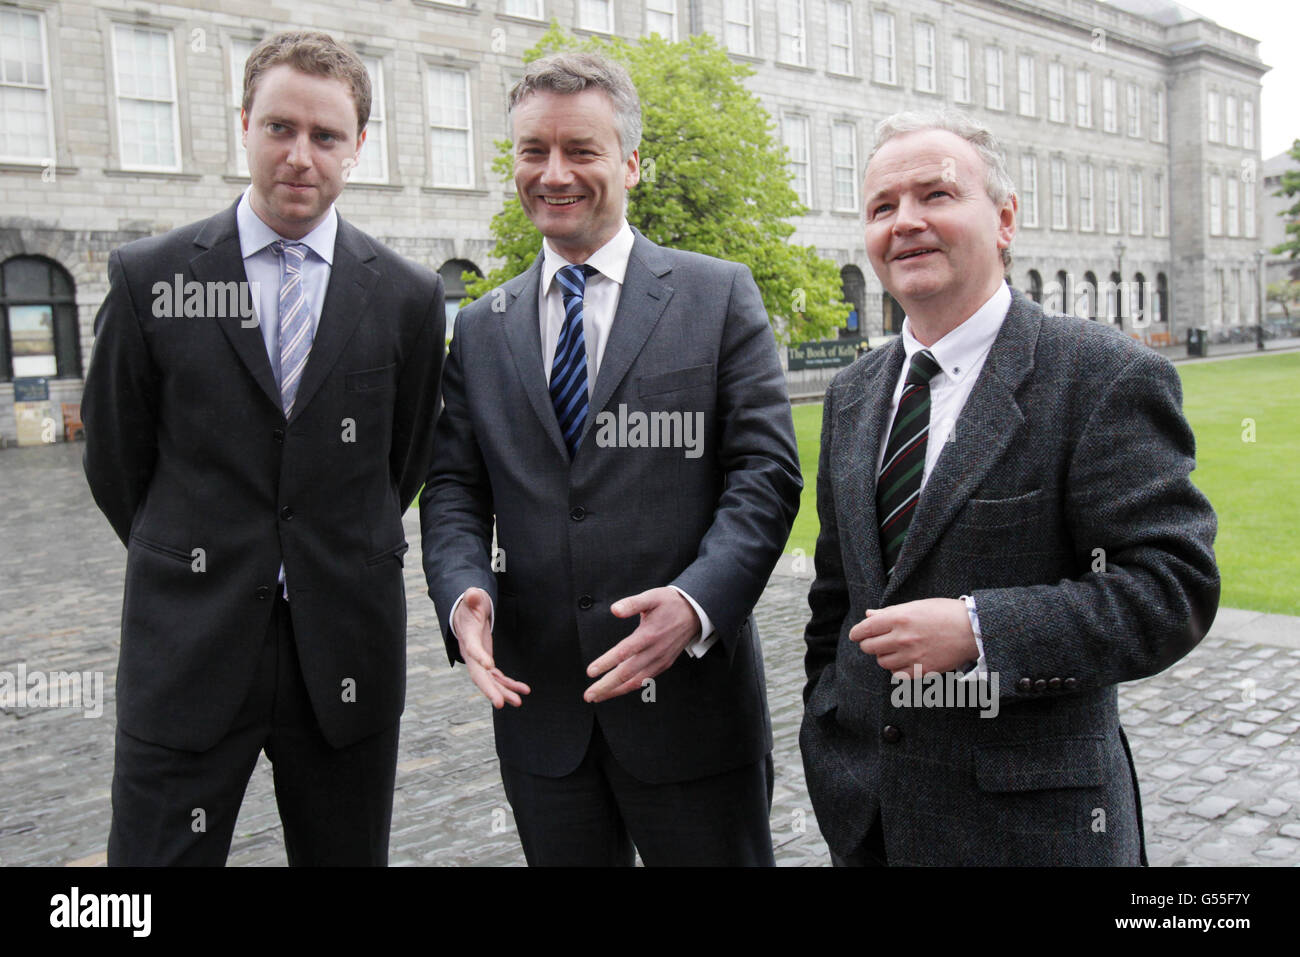 Provost Dr Patrick Prendergast (center) with historians Dr Peter Crooks (left) and Sean Duffy (right) in the grounds of Trinity College Dublin, as they launch the reconstruction of Irish Medieval documents burnt in the Four Courts during the Battle of Dublin in 1922. Stock Photo